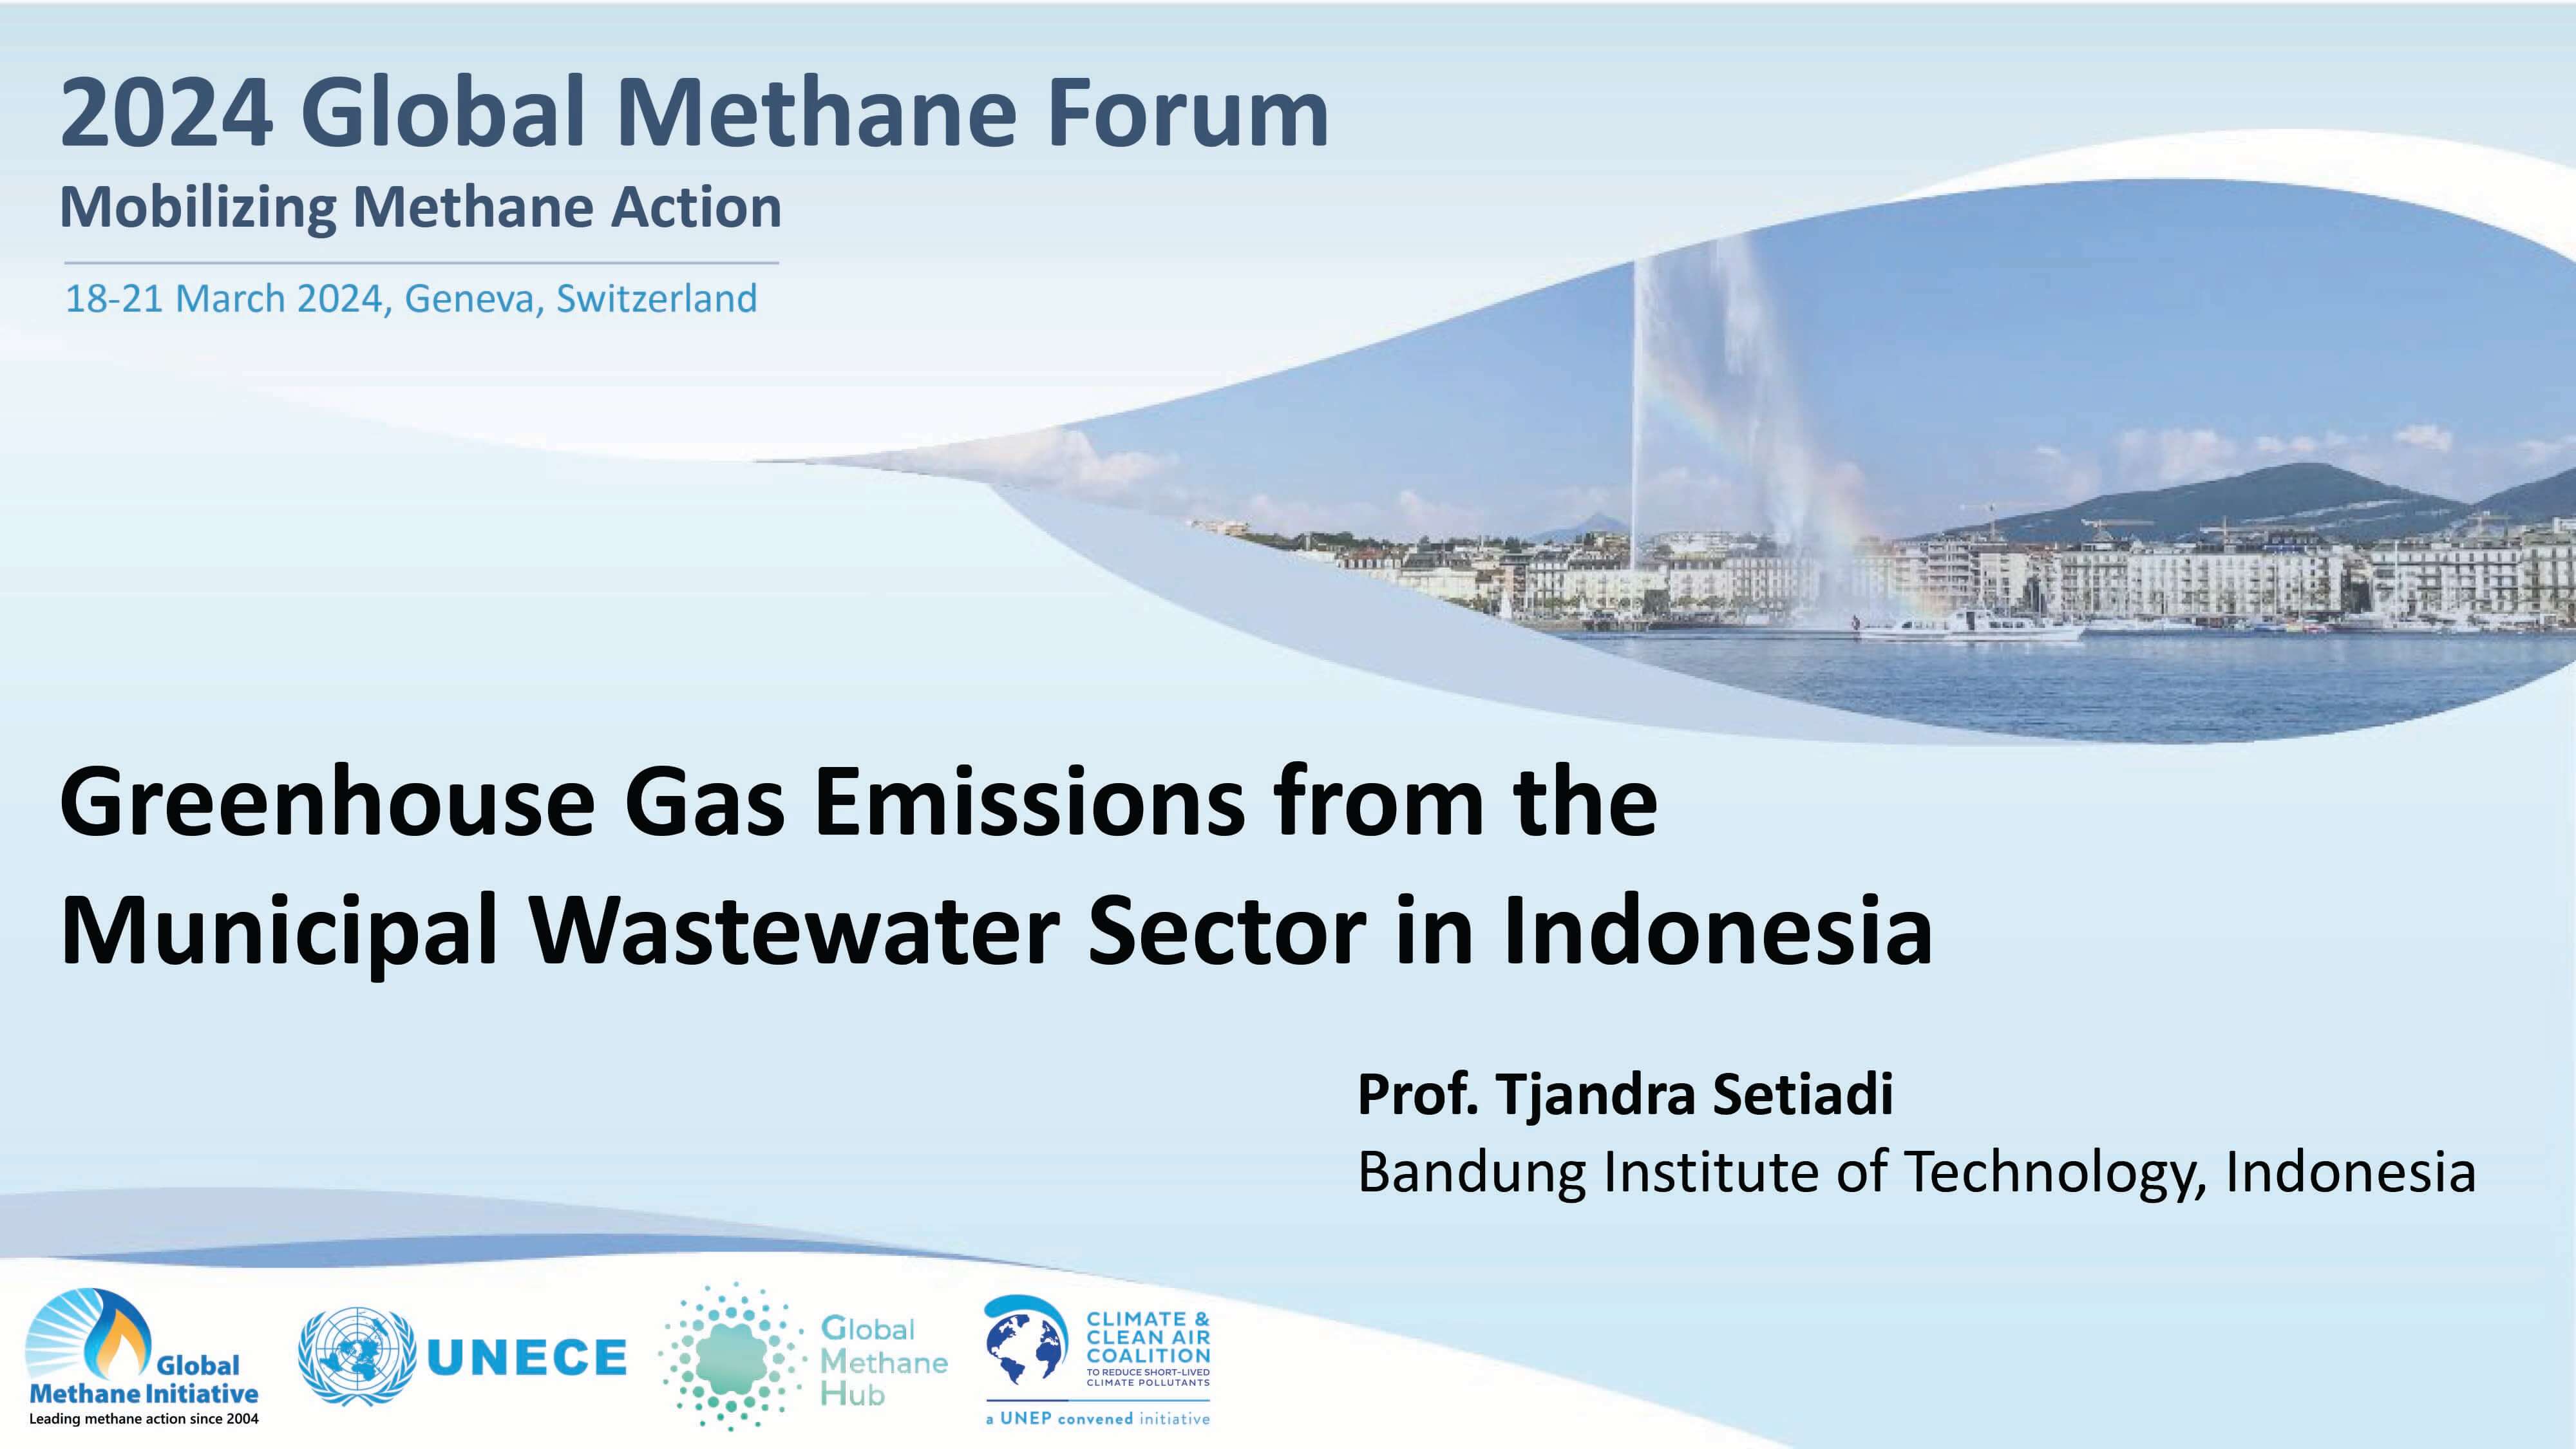 Greenhouse Gas Emissions from the Muncipal Wastewater Sector in Indonesia